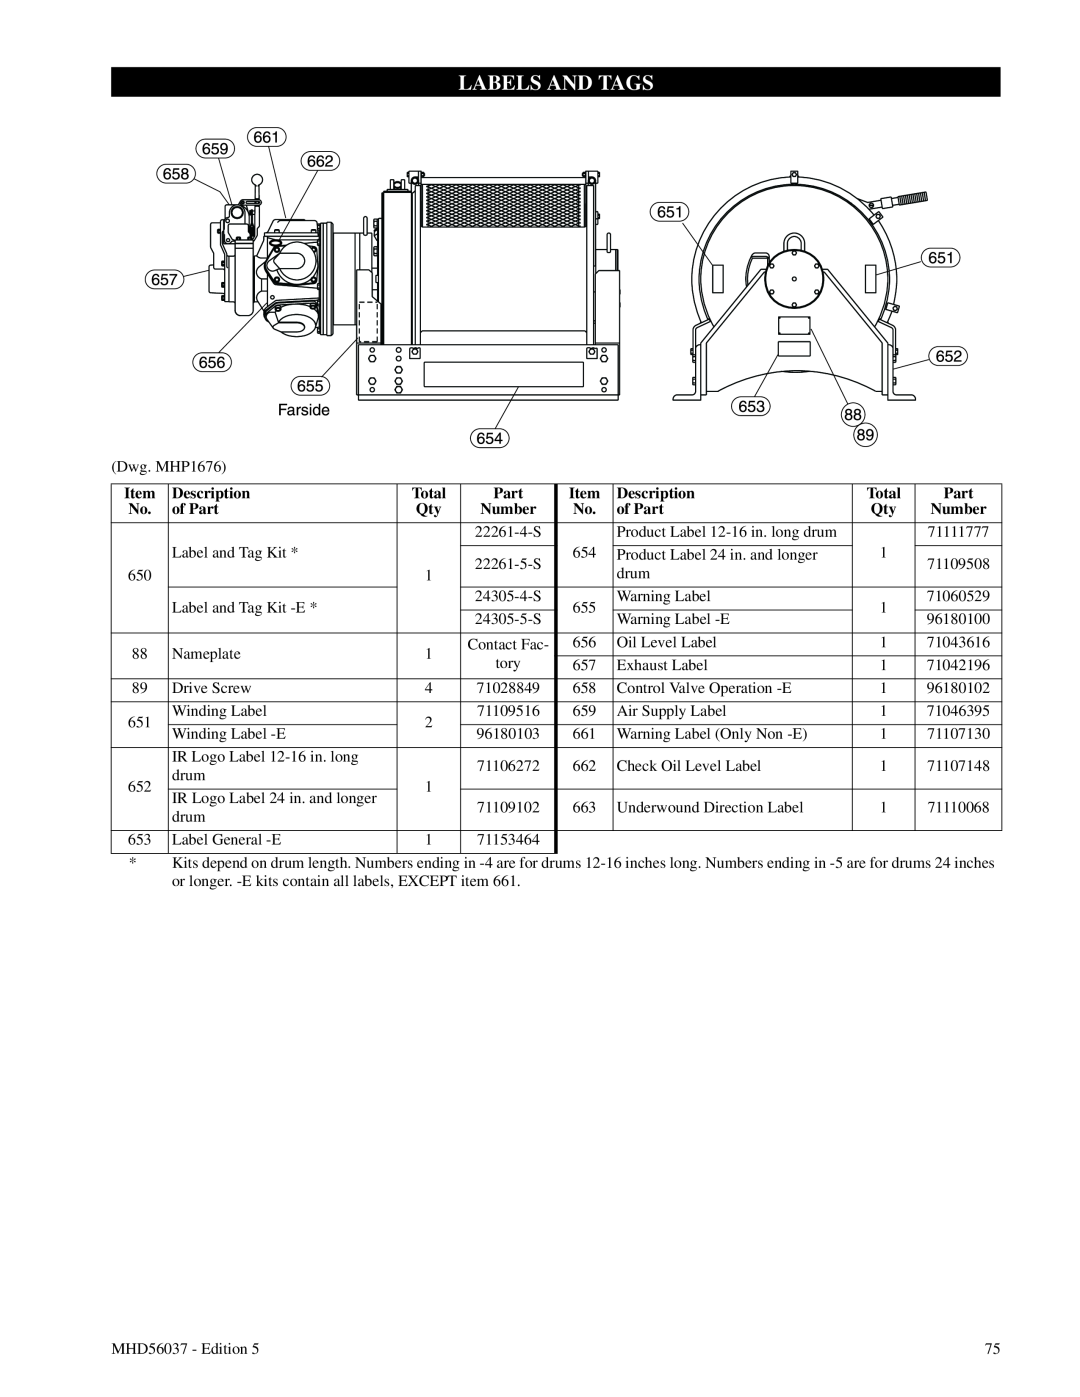 Ingersoll-Rand FA5T manual Description, of Part, Number 